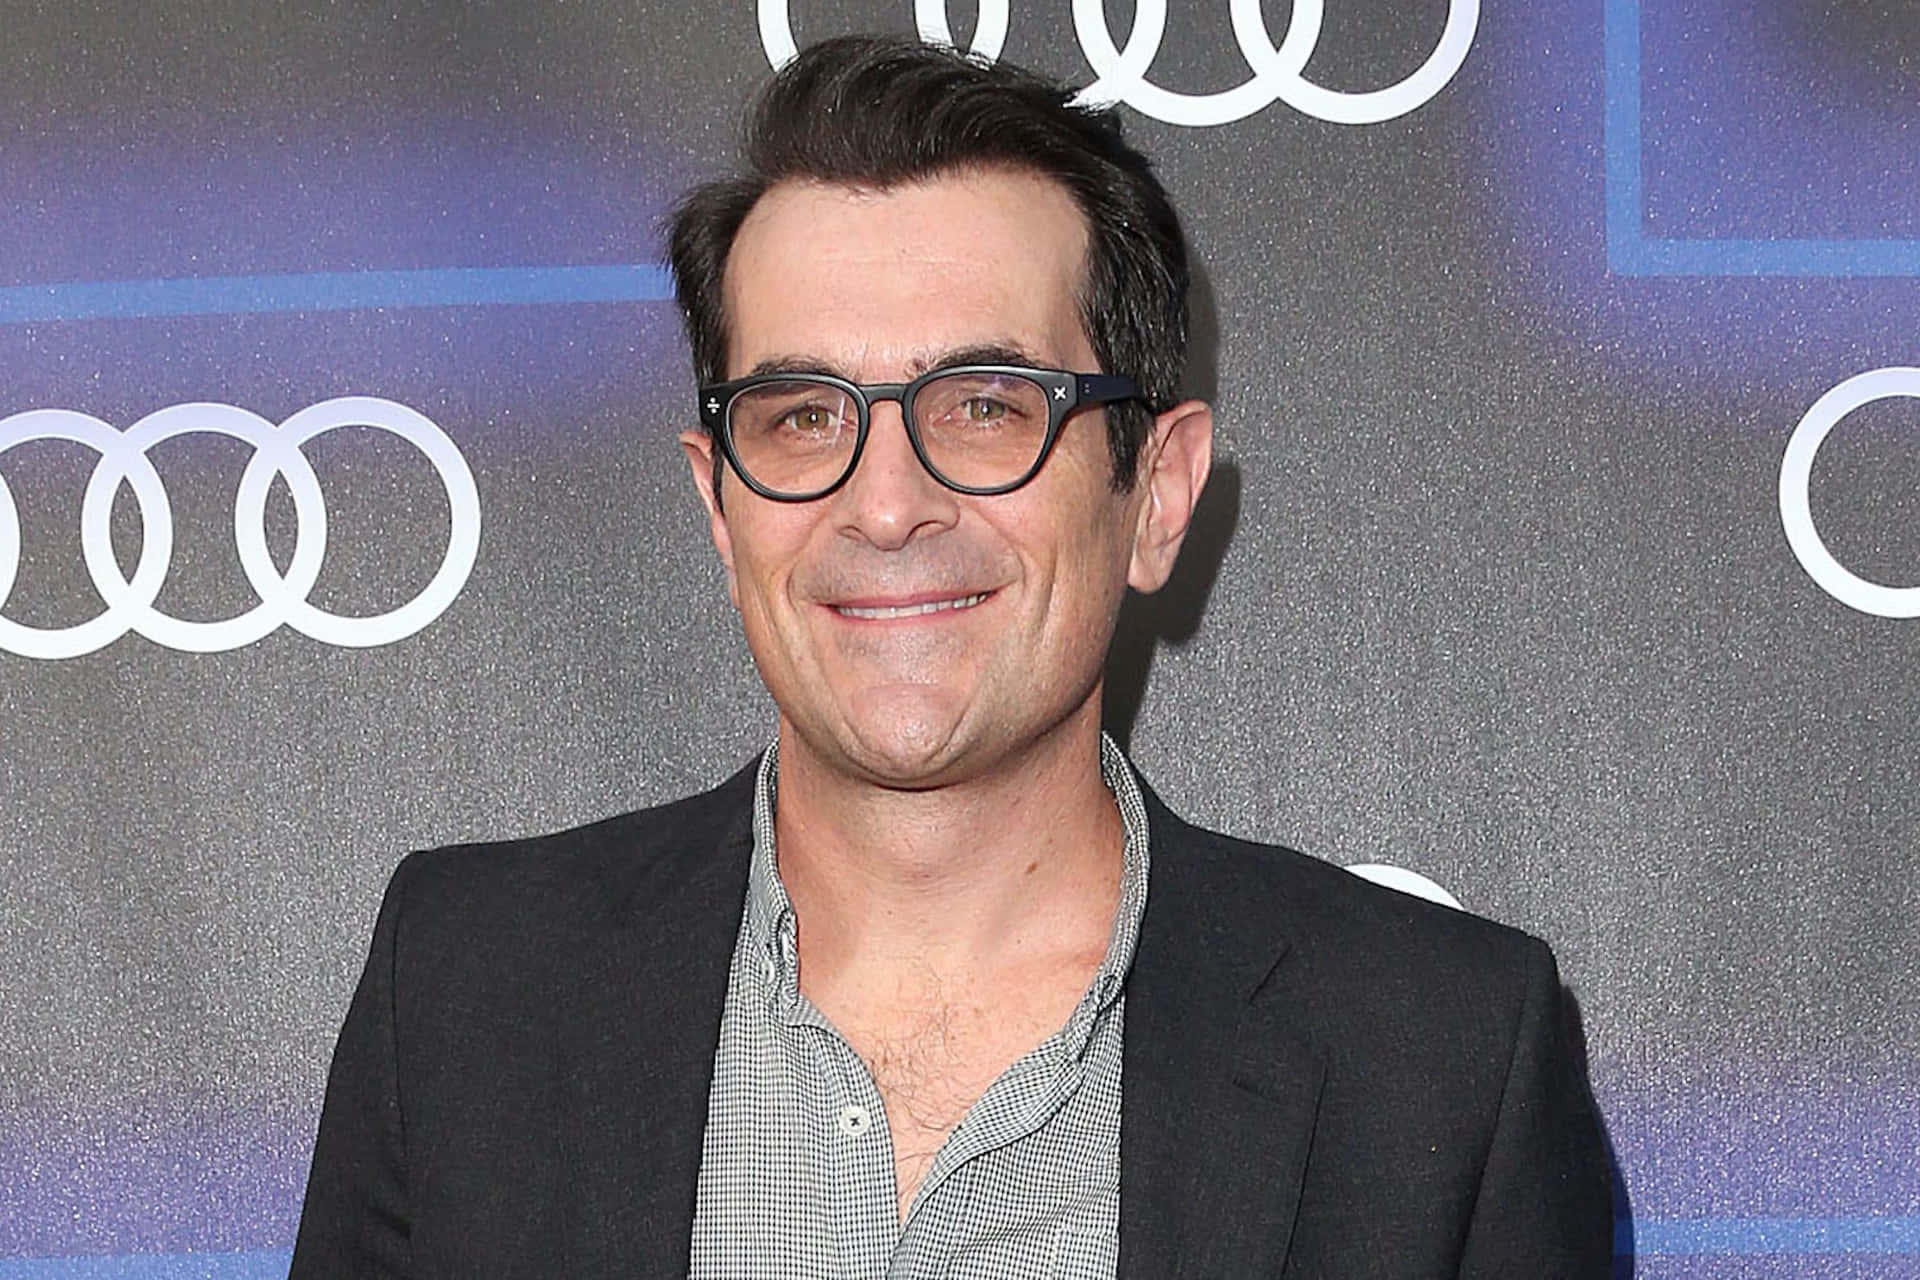 Actor Ty Burrell smiling at an event Wallpaper